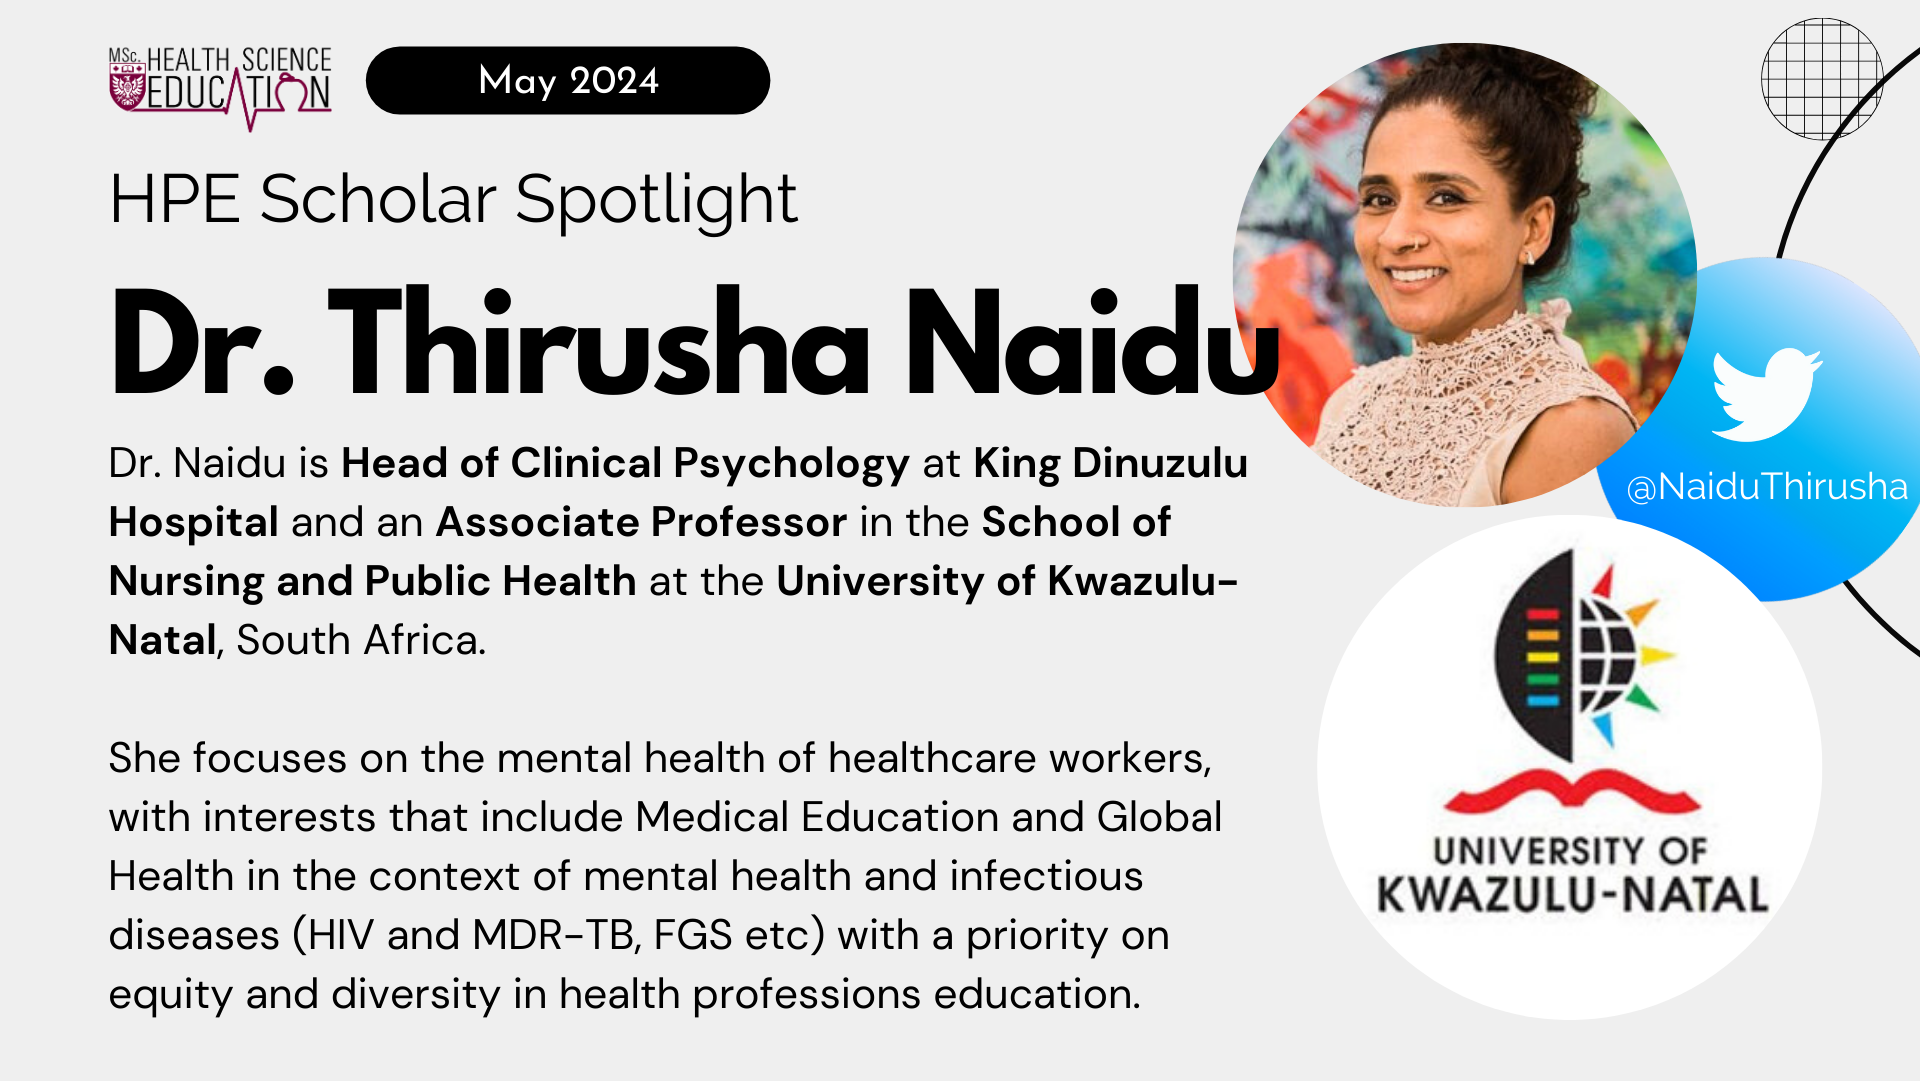 Text-based graphic including a headshot of a smiling woman, a twitter logo tagged with the text @NaiduThirusha, and a logo for the University of Kwazulu-Natal